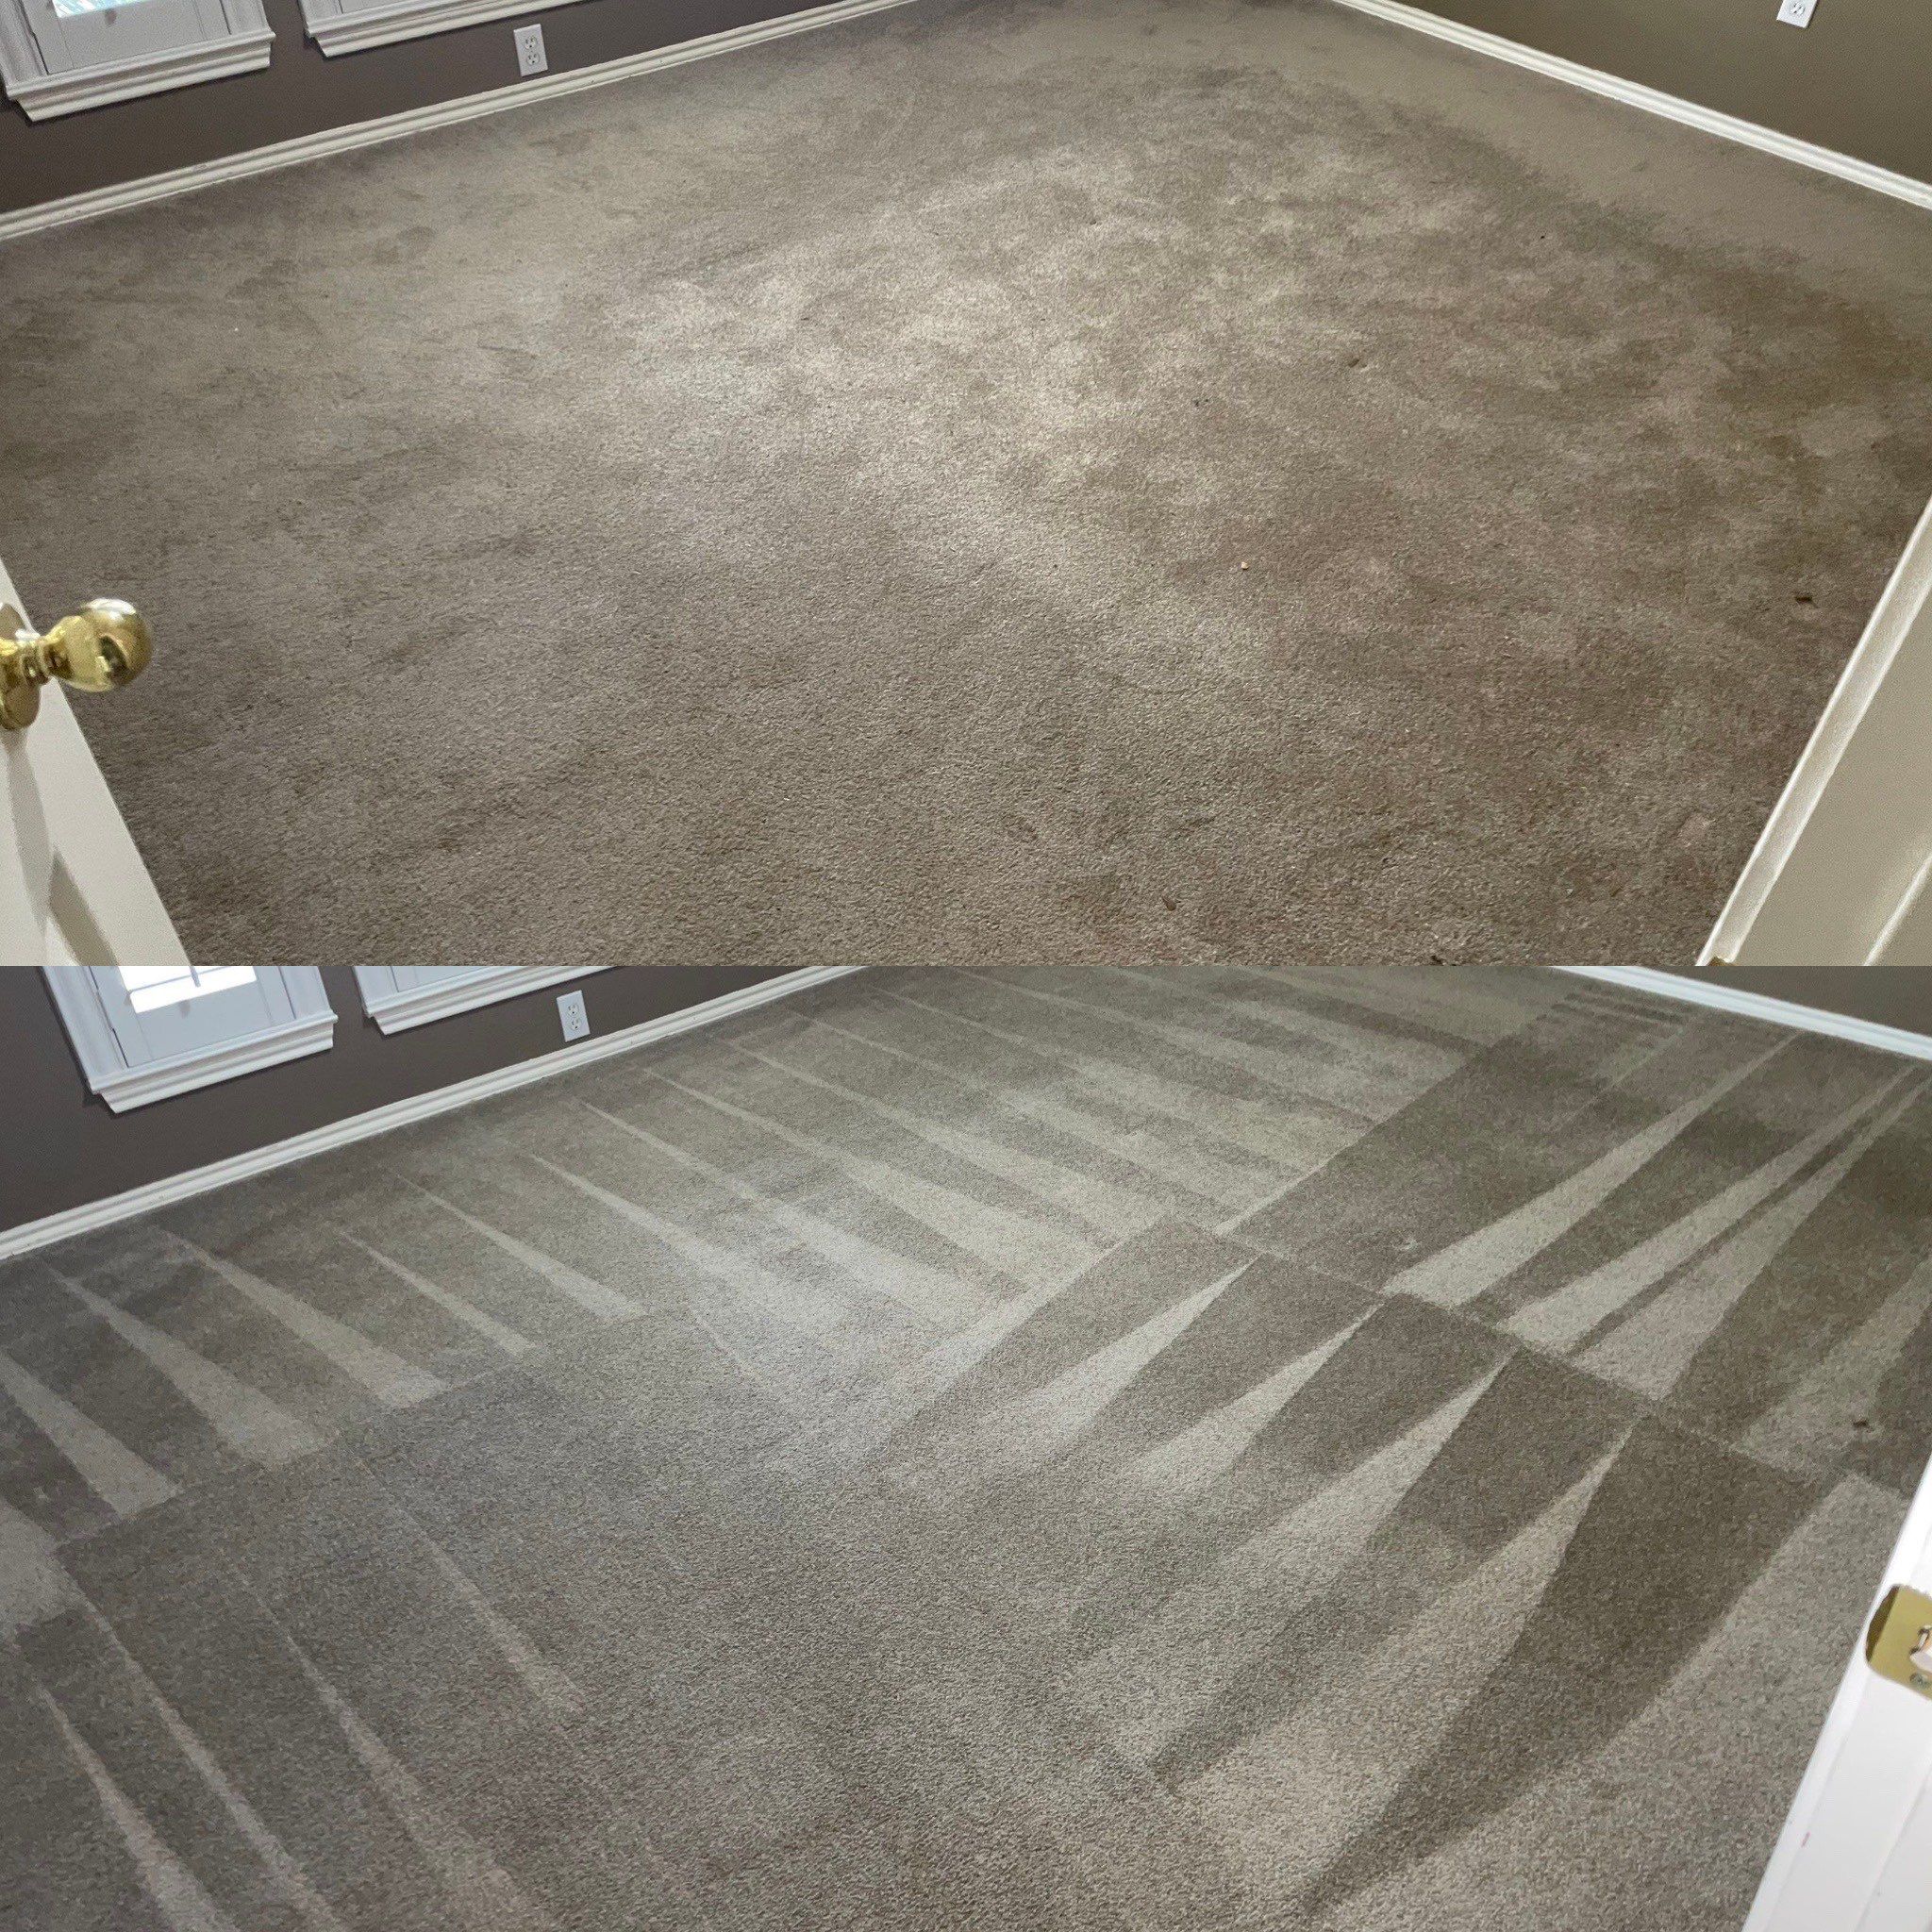 professional carpet cleaning deep cleaning removing dirt stains leaving clean lines from steam cleaner or similar equipment